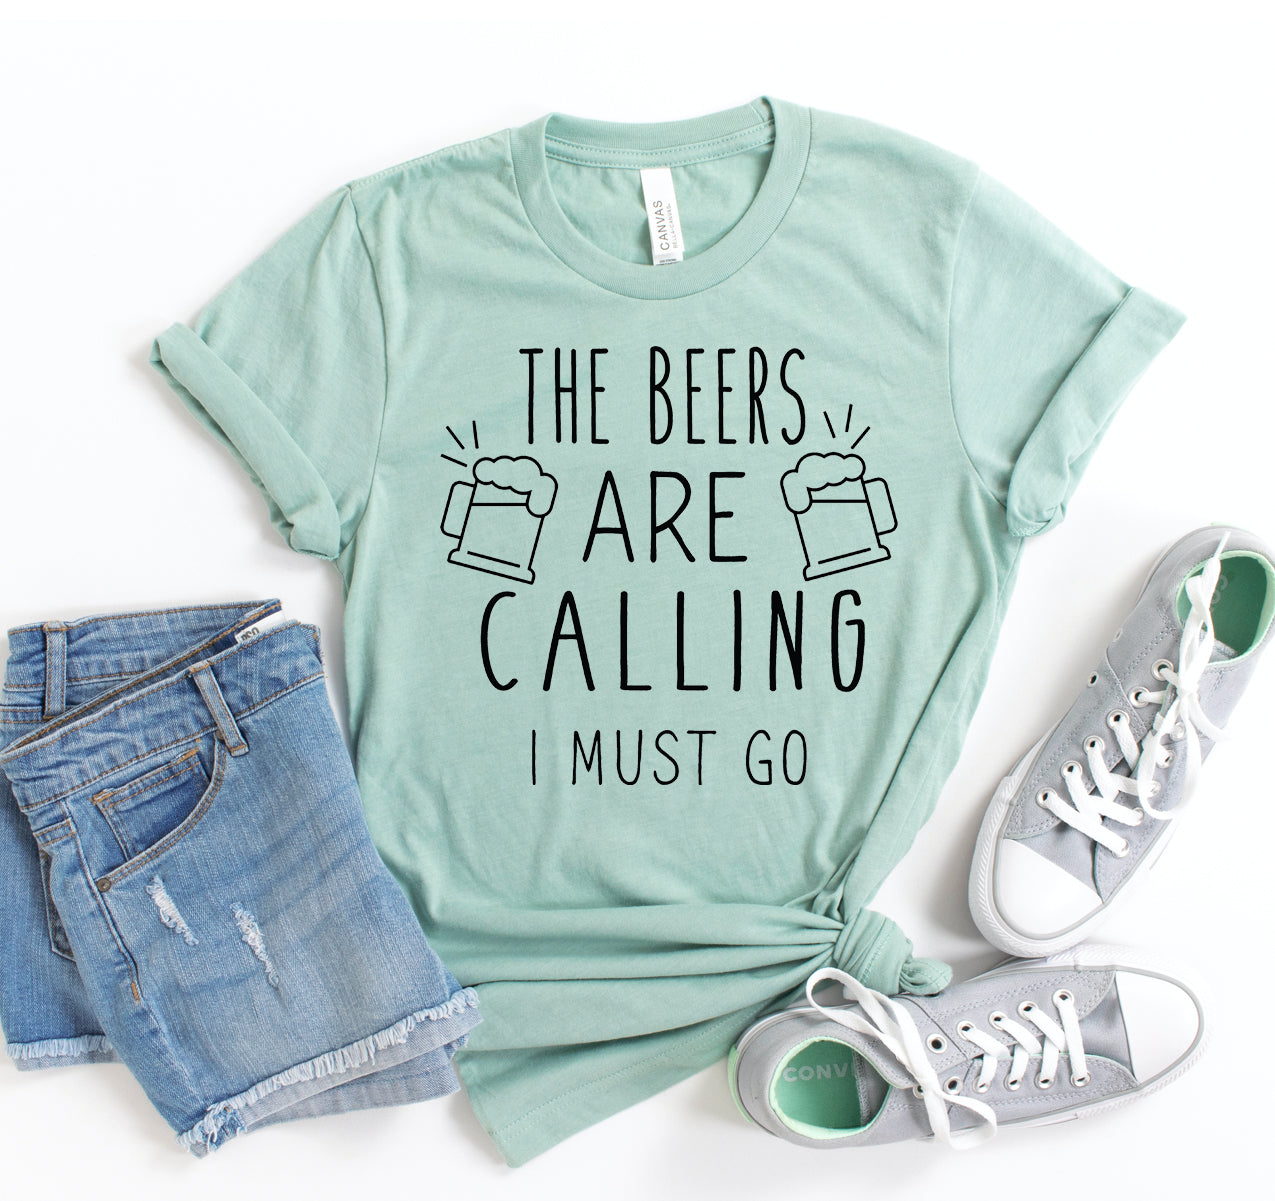 The Beers Are Calling T-shirt